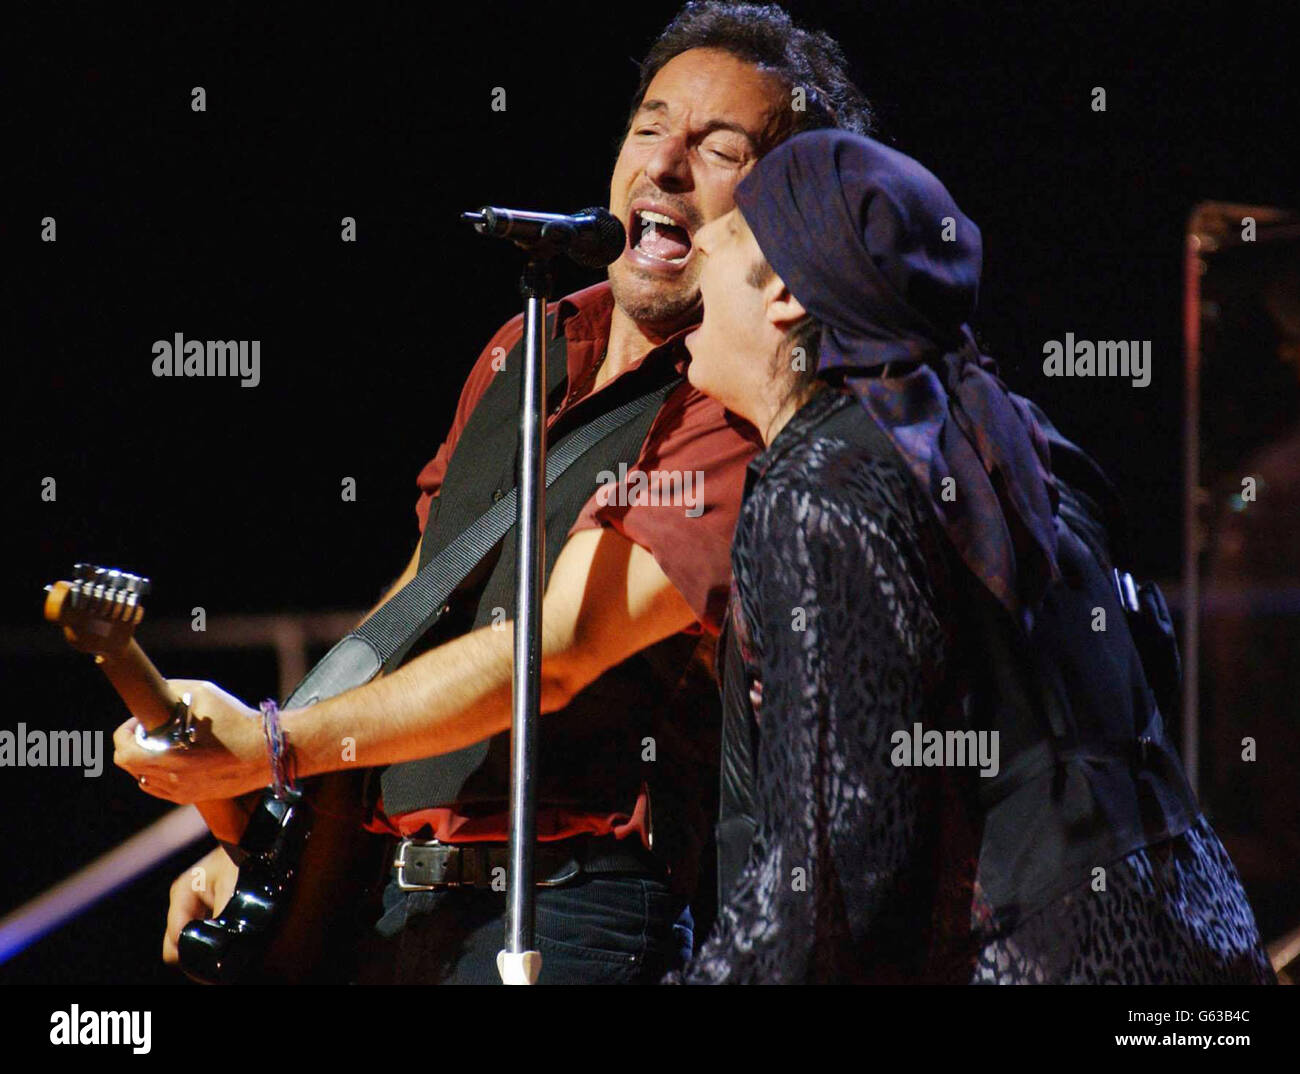 American rock star Bruce Springsteen (left) performing on stage with Little Steven (Steven Van Zandt) during a one-off London concert at Wembley Arena as part of his world tour following the release of his first album for eight years 'The Rising'. Stock Photo